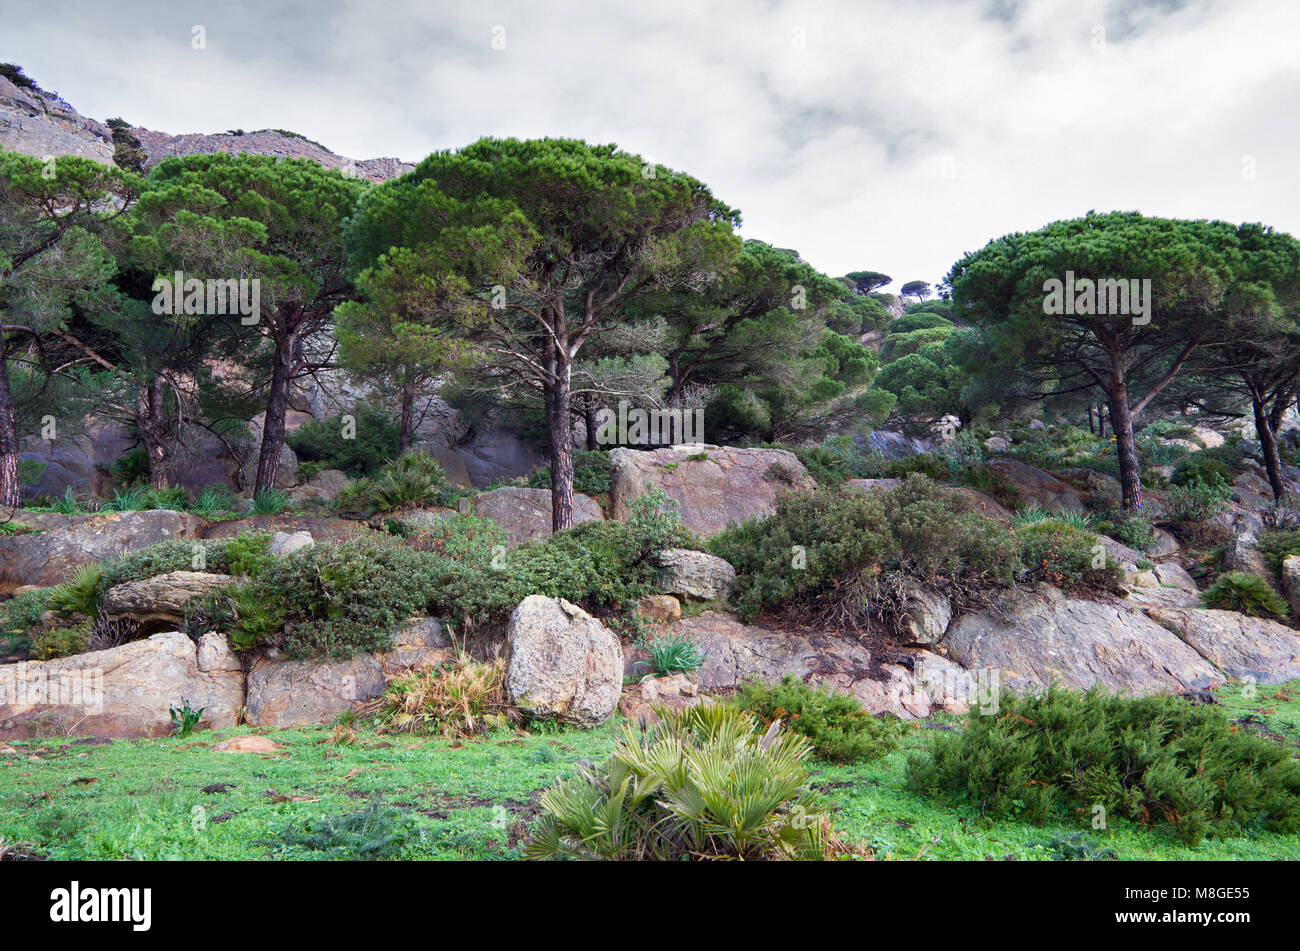 El Estrecho Natural Park in Cadiz (Spain) is located on the northern side of the Strait of Gibraltar. It protects a range of ecosystems and species. Stock Photo